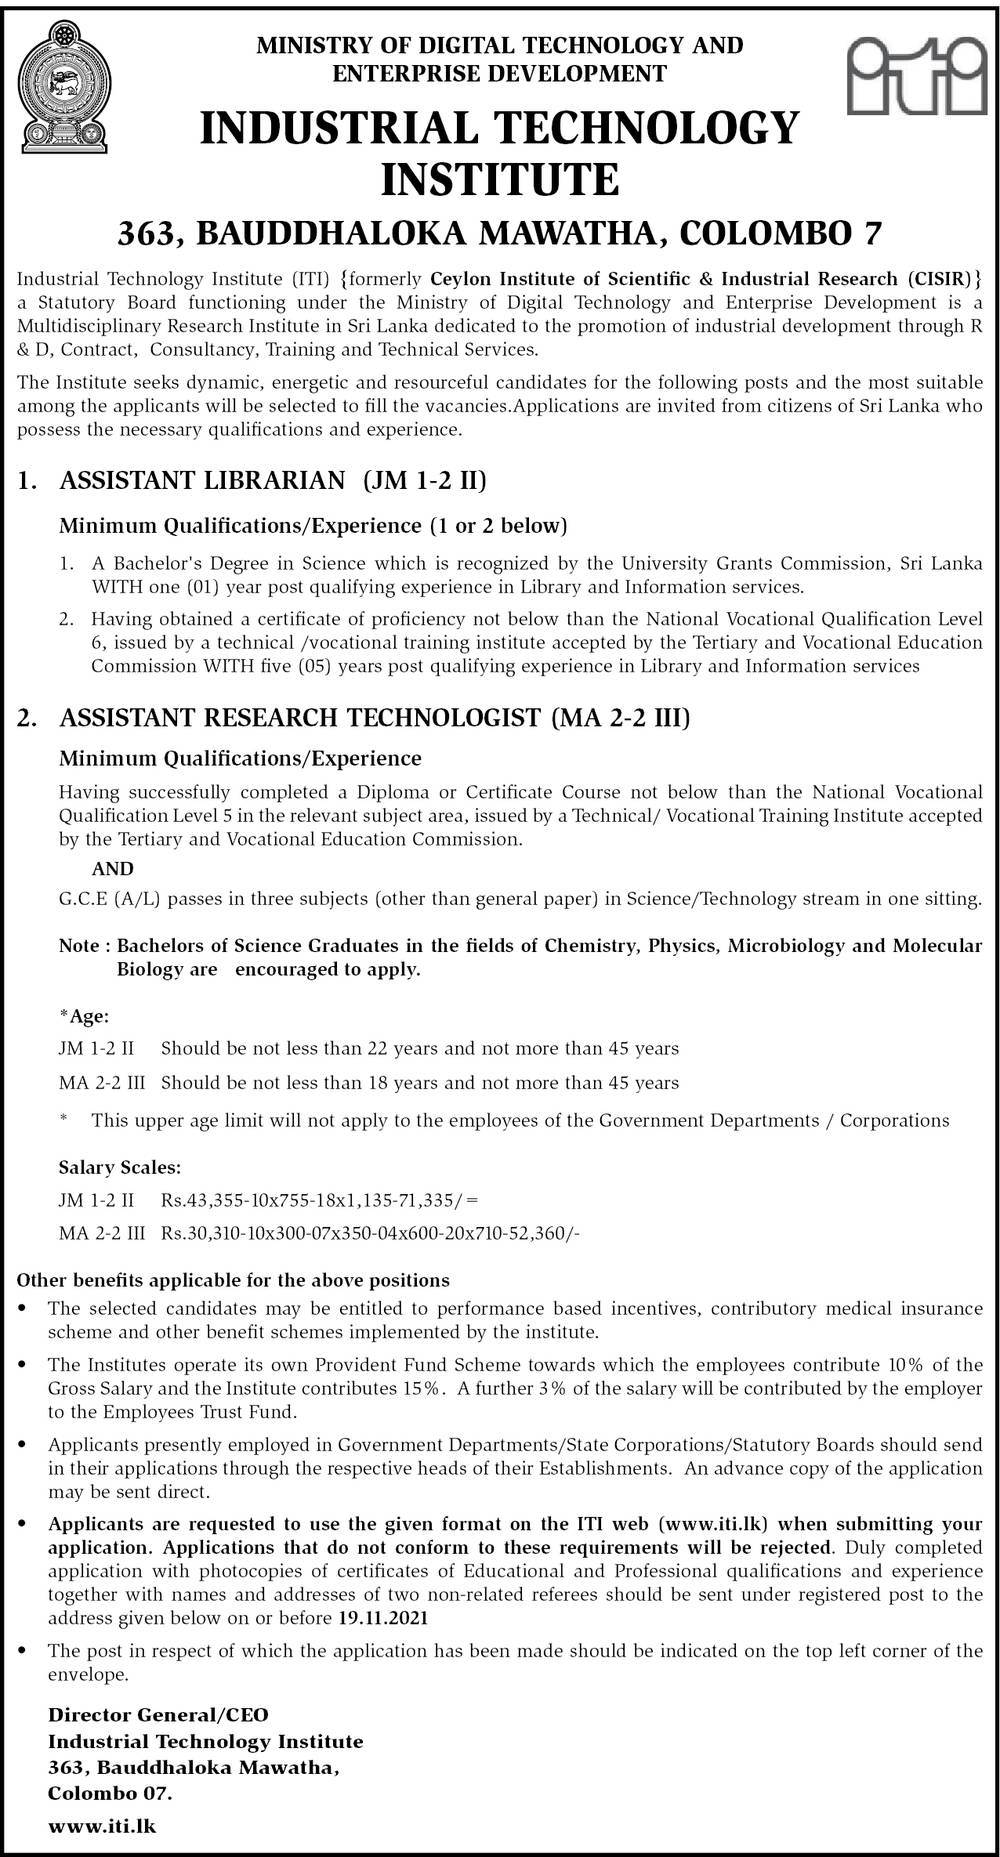 Assistant Librarian, Assistant Research Technologist - Industrial Technology Institute Jobs Vacancies Applications Forms Downloads in PDF